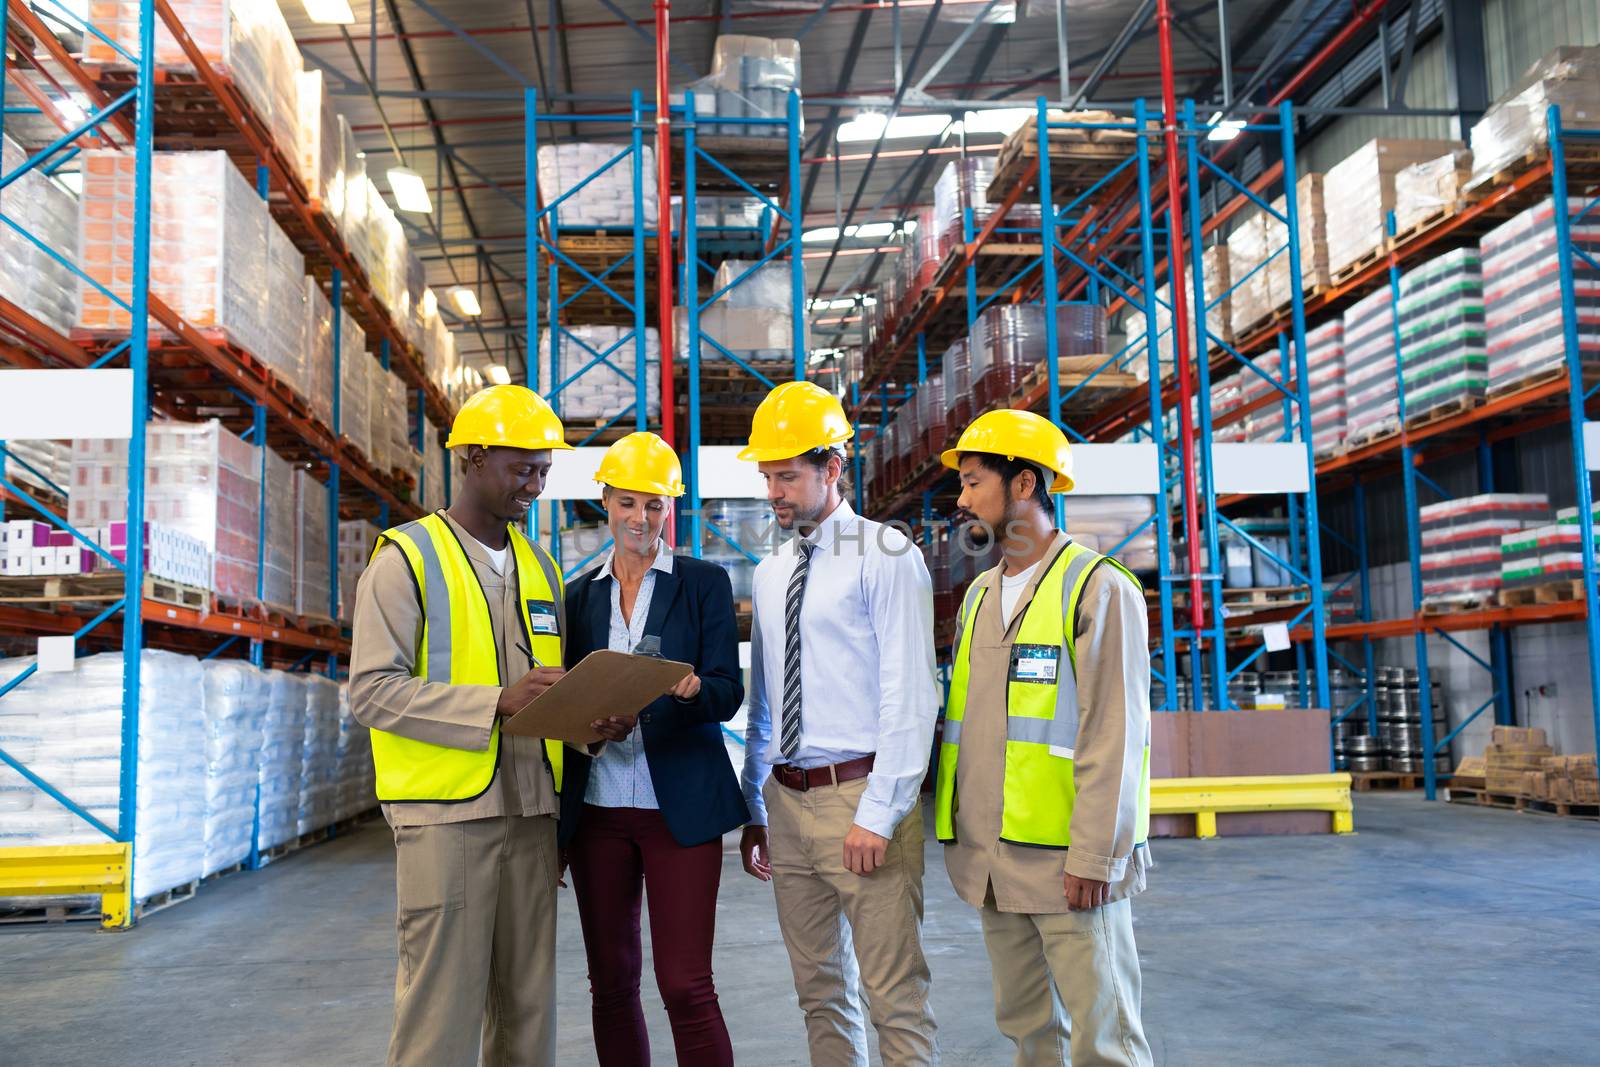 Front view of diverse staffs working together on clipboard in warehouse. This is a freight transportation and distribution warehouse. Industrial and industrial workers concept